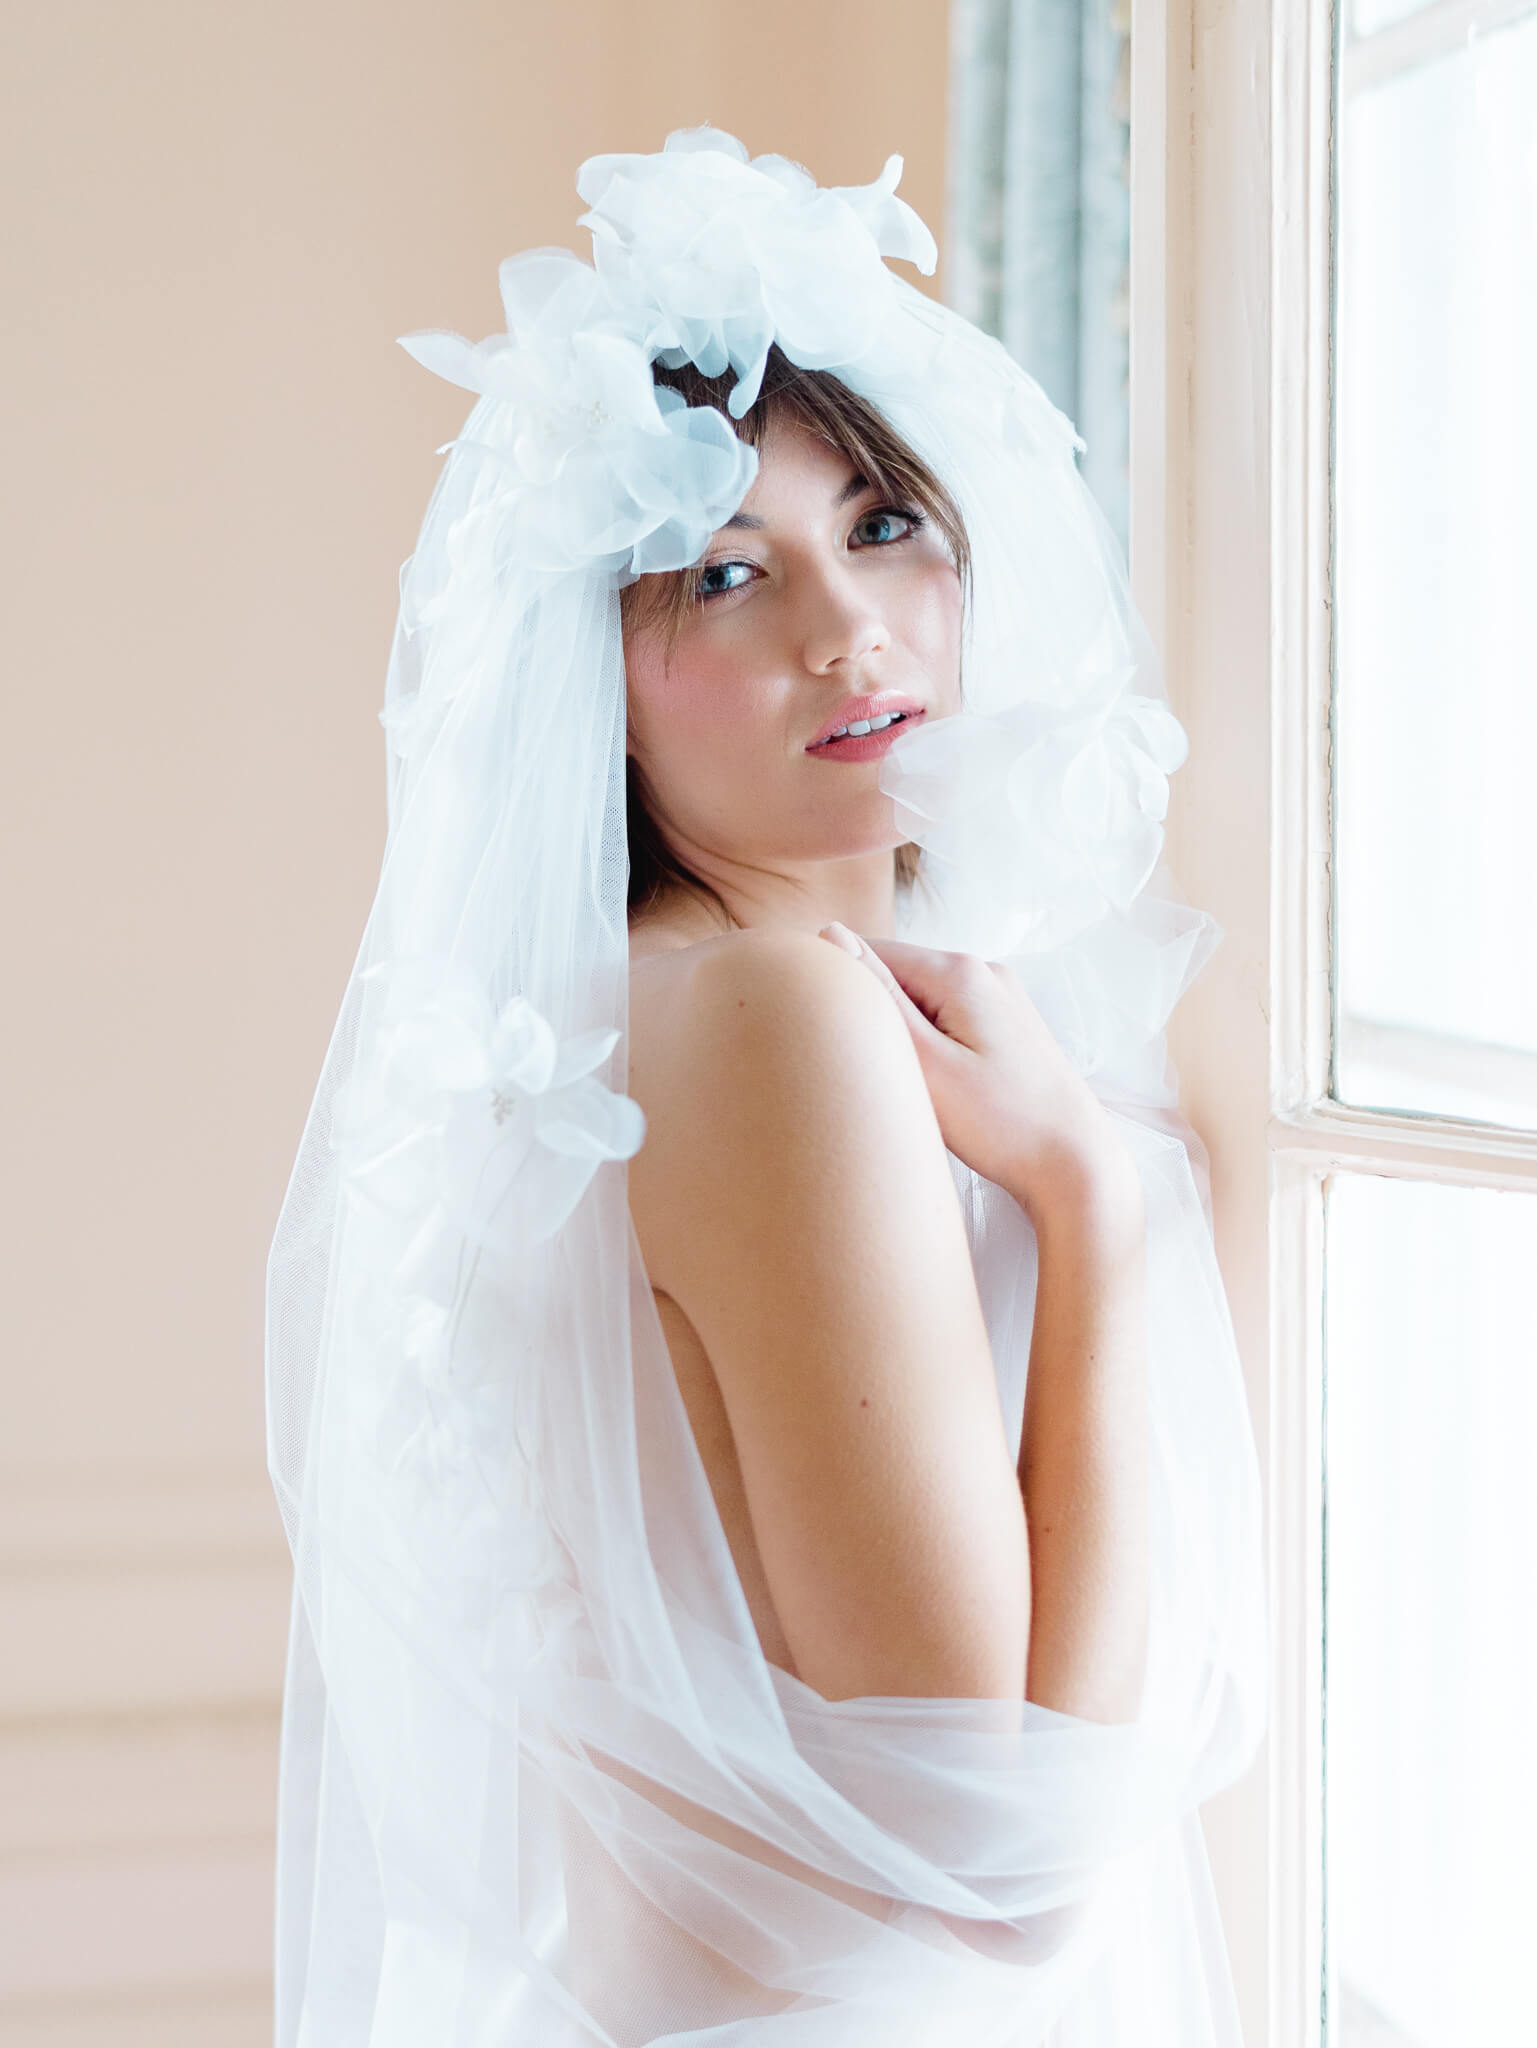 Closeup boudoir image of a bride wrapped in her veil while standing near a window in Lowndes Grove's pink room.